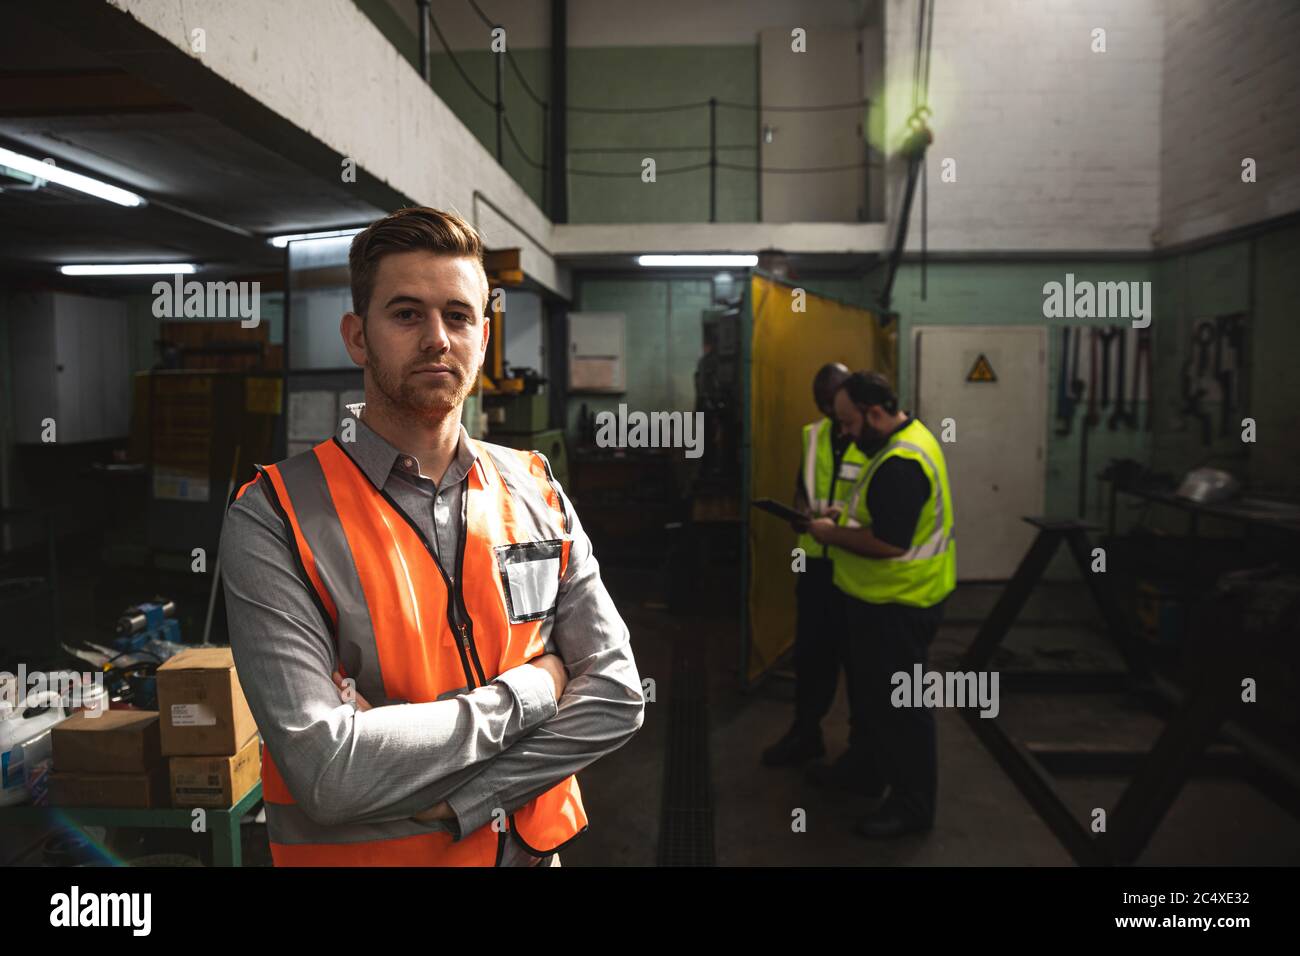 Male factory worker wearing a Hi-vis vest standing with his arms crossed at the factory Stock Photo